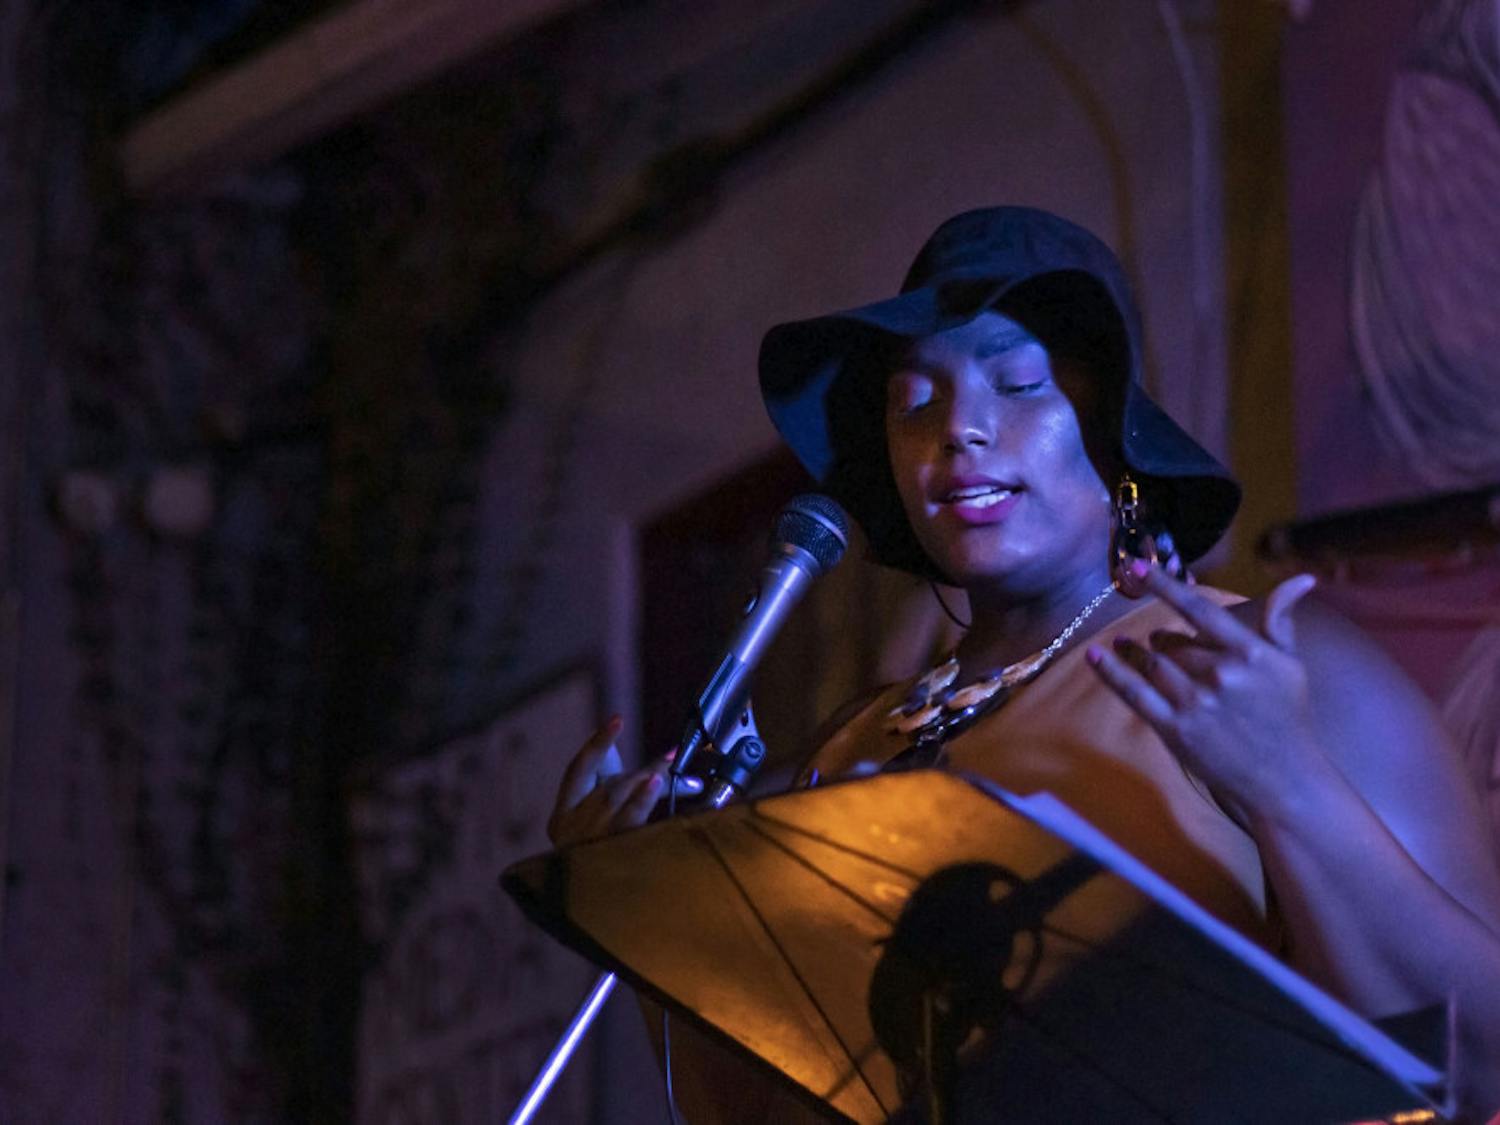 Kayla Rodney performs at the open mic night Sept. 24 at the Civic Media Center. Rodney was the featured artist for the night, which had a theme of Afrofuturism, a genre of media that blends black culture with science fiction and technology.